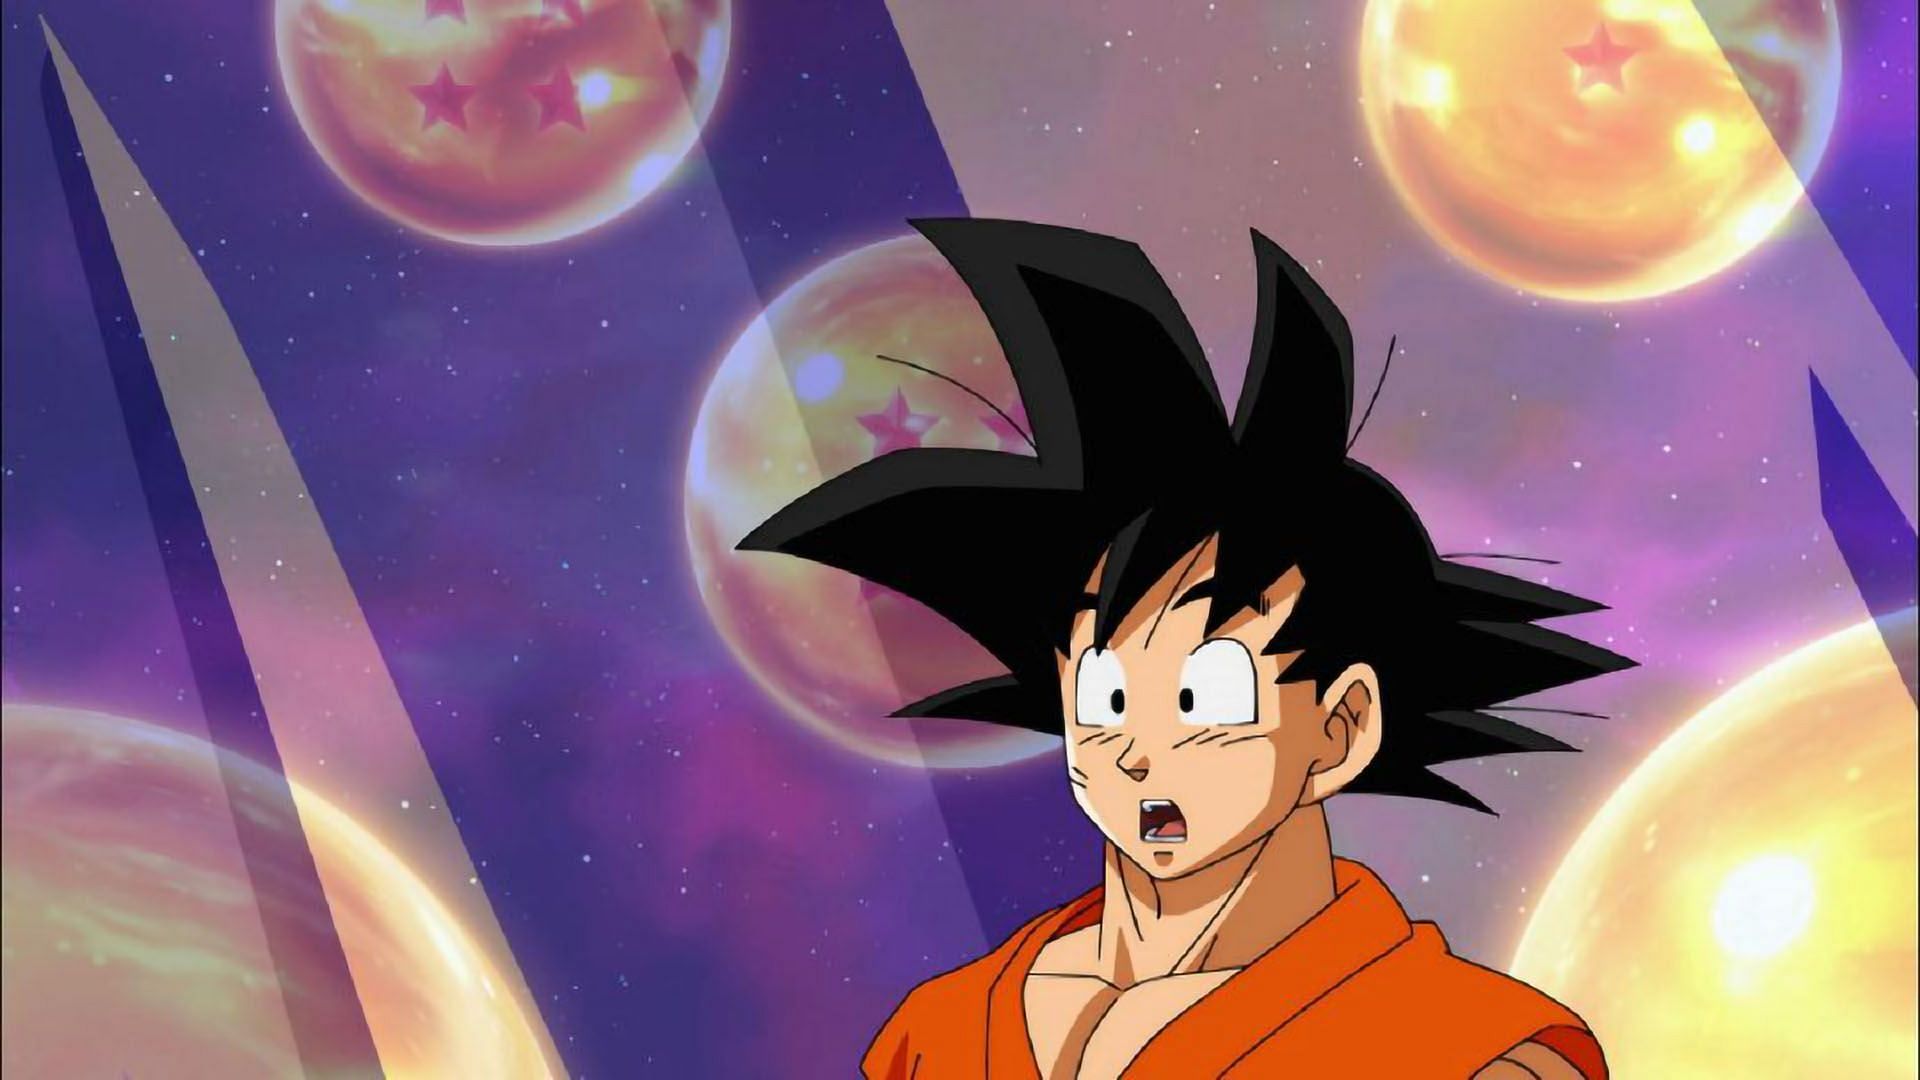 Upcoming Dragon Ball Super movie announced: expected release date, what to expect and more (Image via Toei Animation)